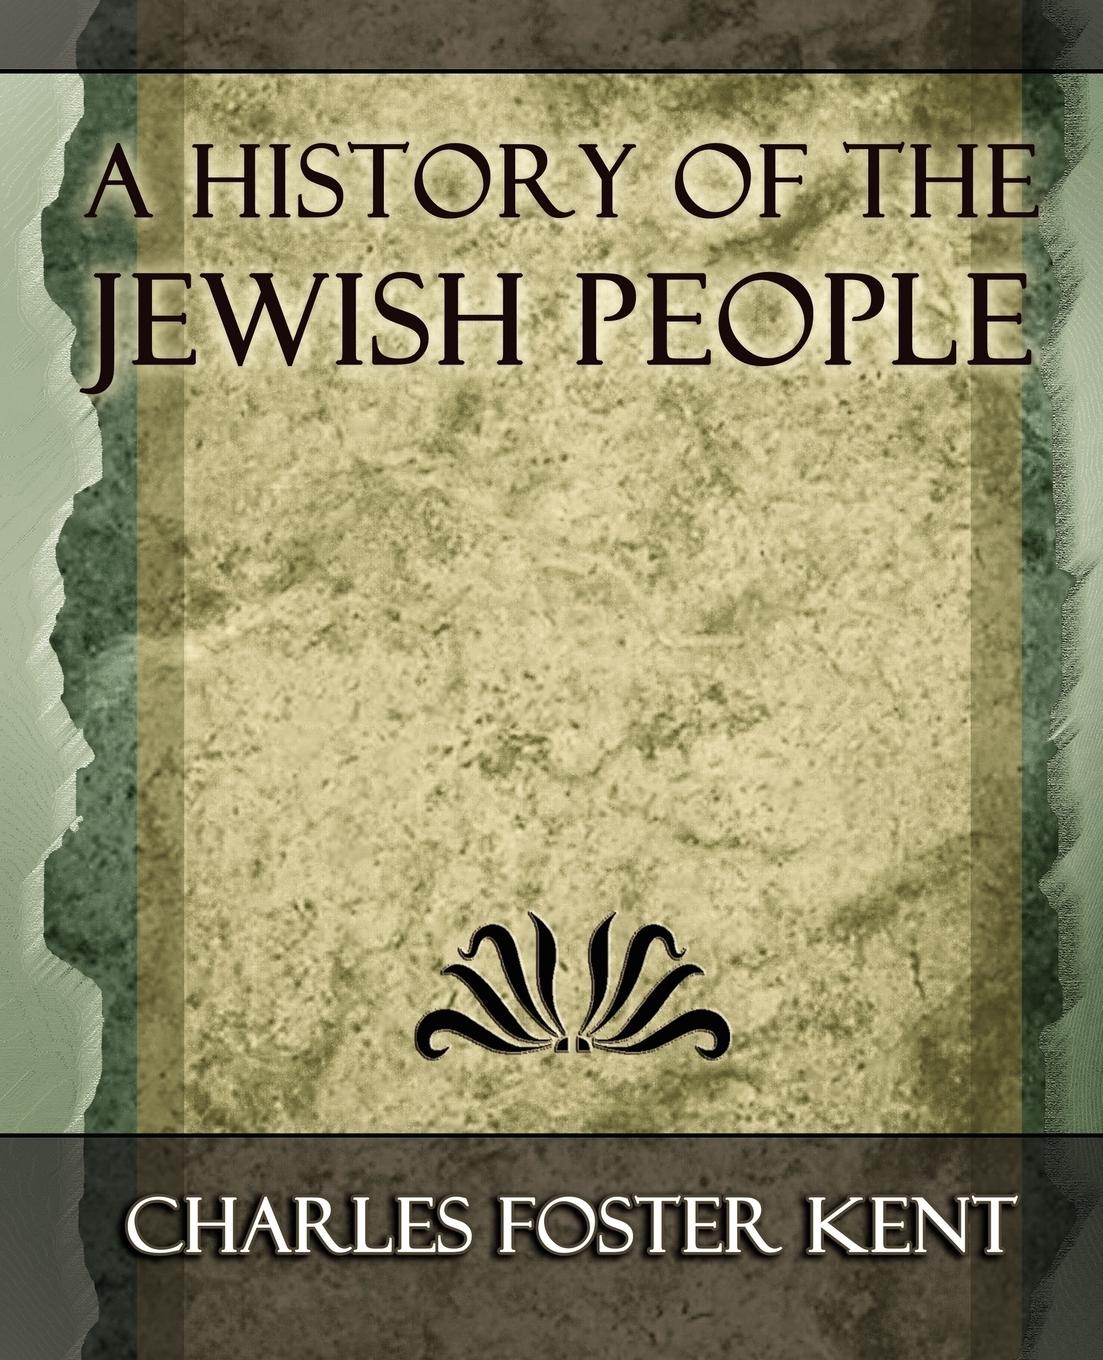 A History of the Jewish People - 1917 - Charles Foster Kent, Foster Kent Charles Foster Kent